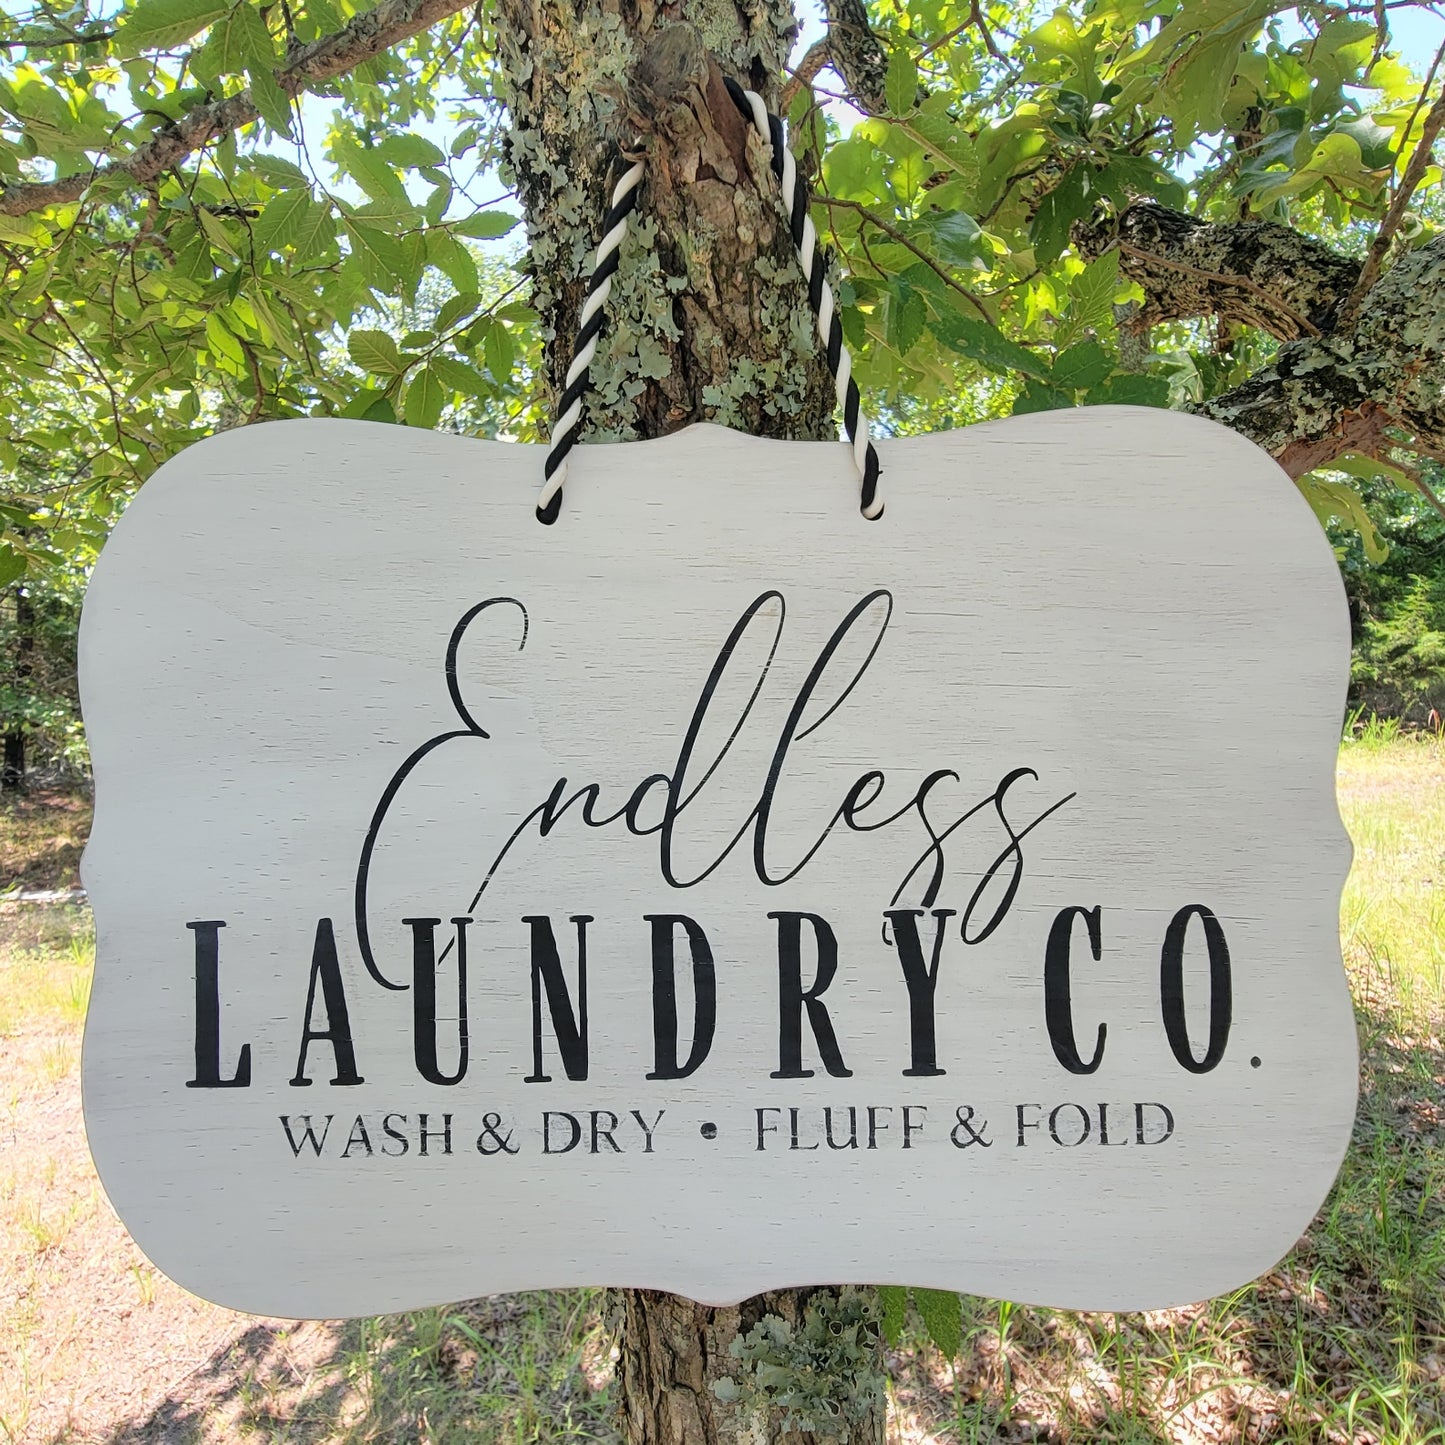 Endless Laundry Co.